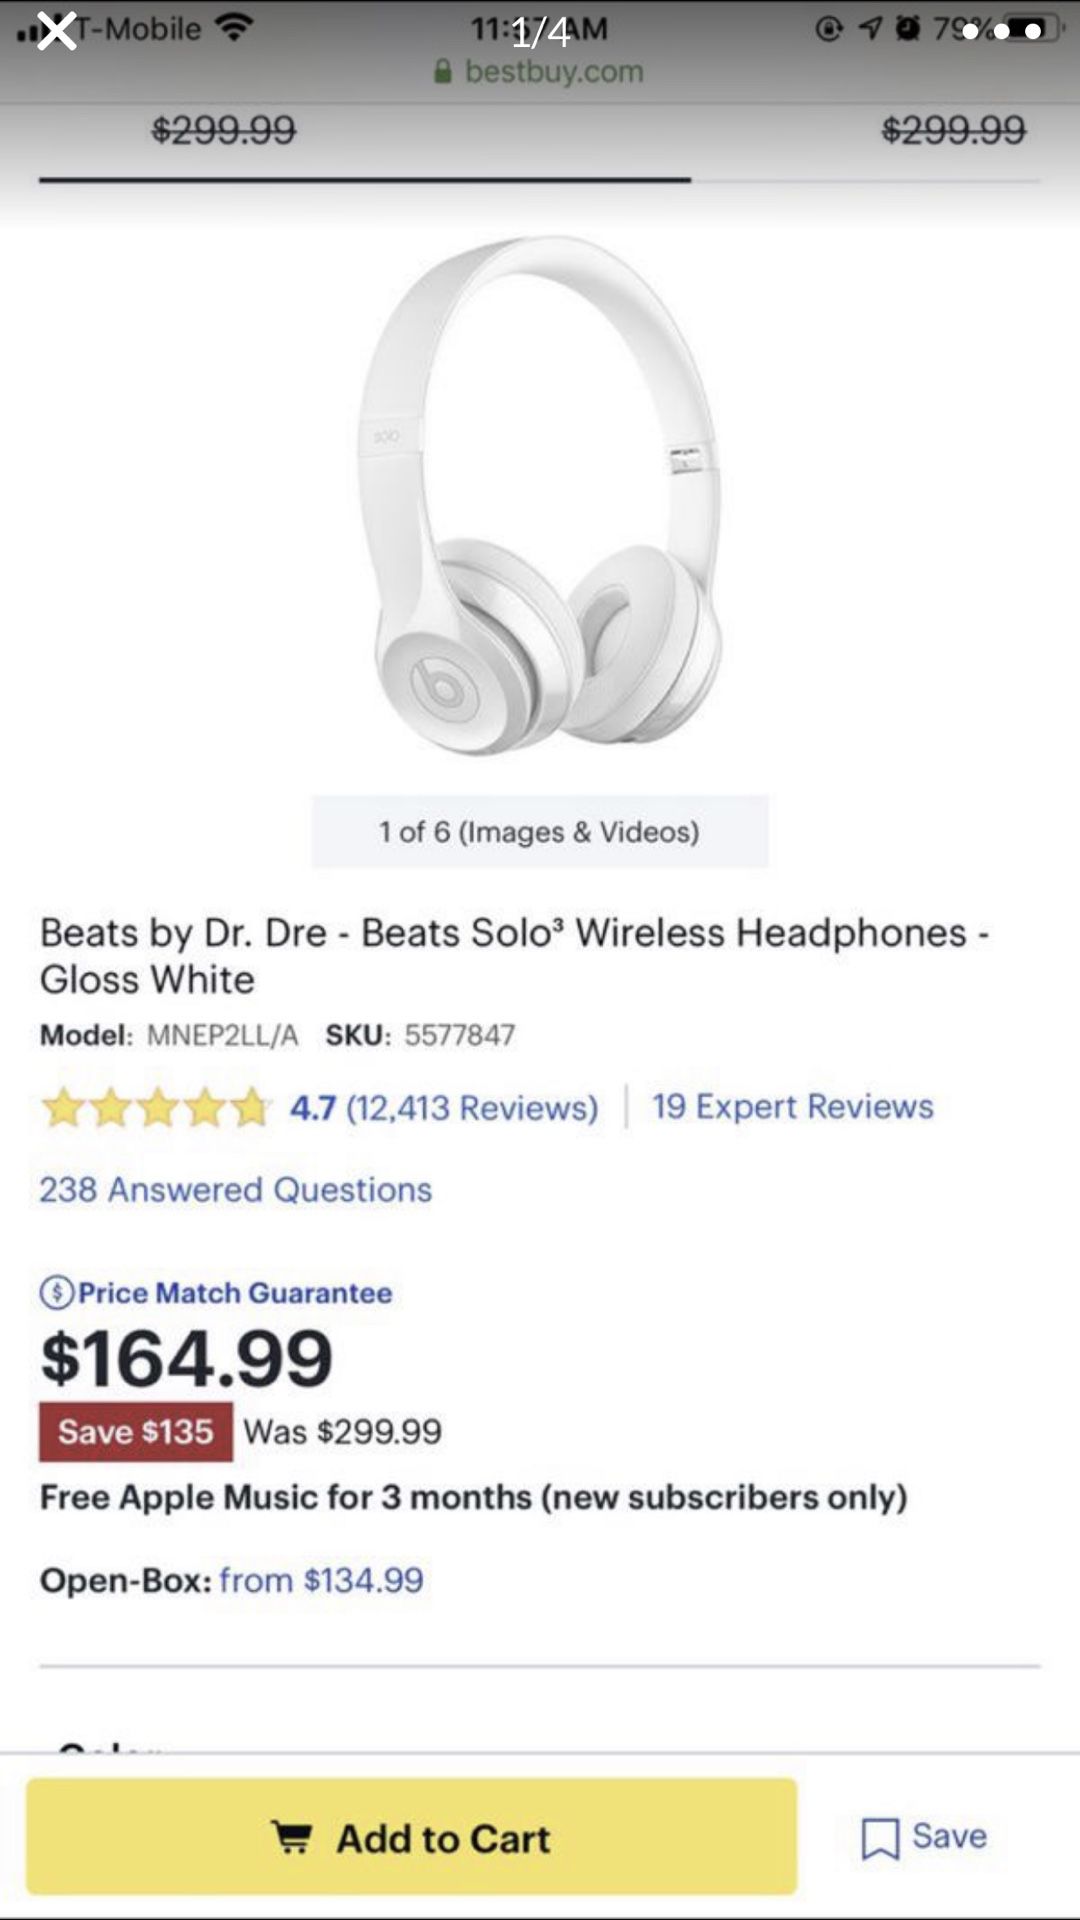 Brand new Beats by Dr. Dre - Beats Solo³ Wireless Headphones - Gloss White